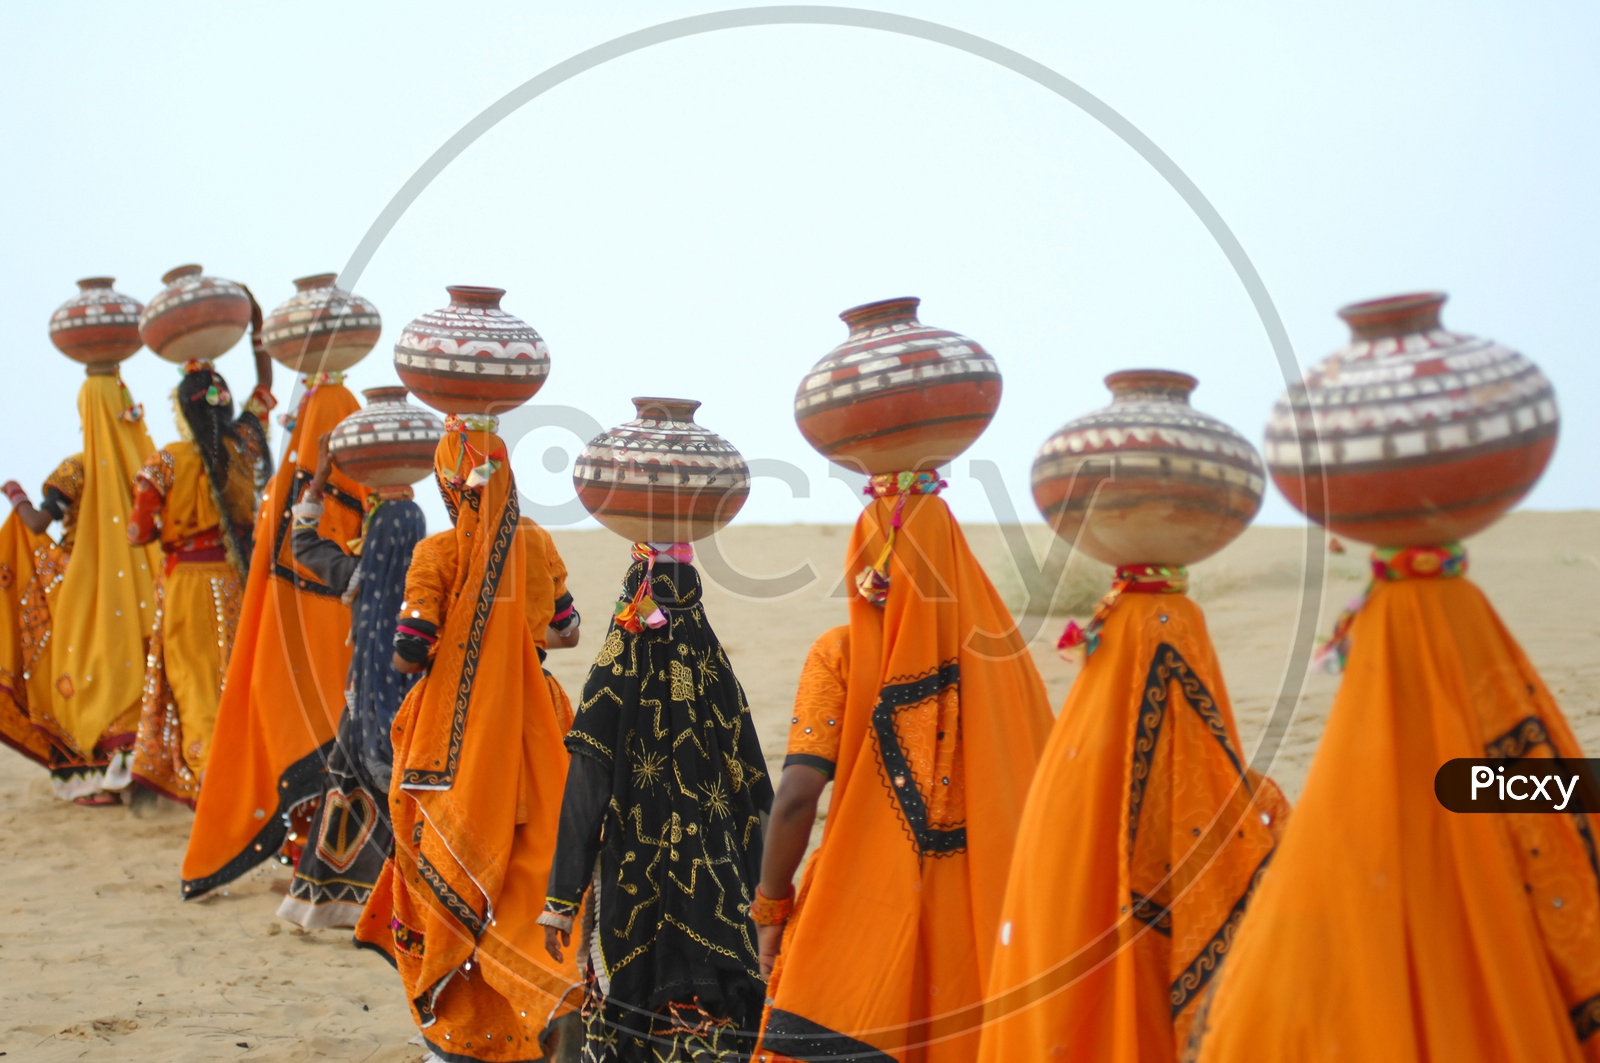 Rajasthani women carrying pots on their heads